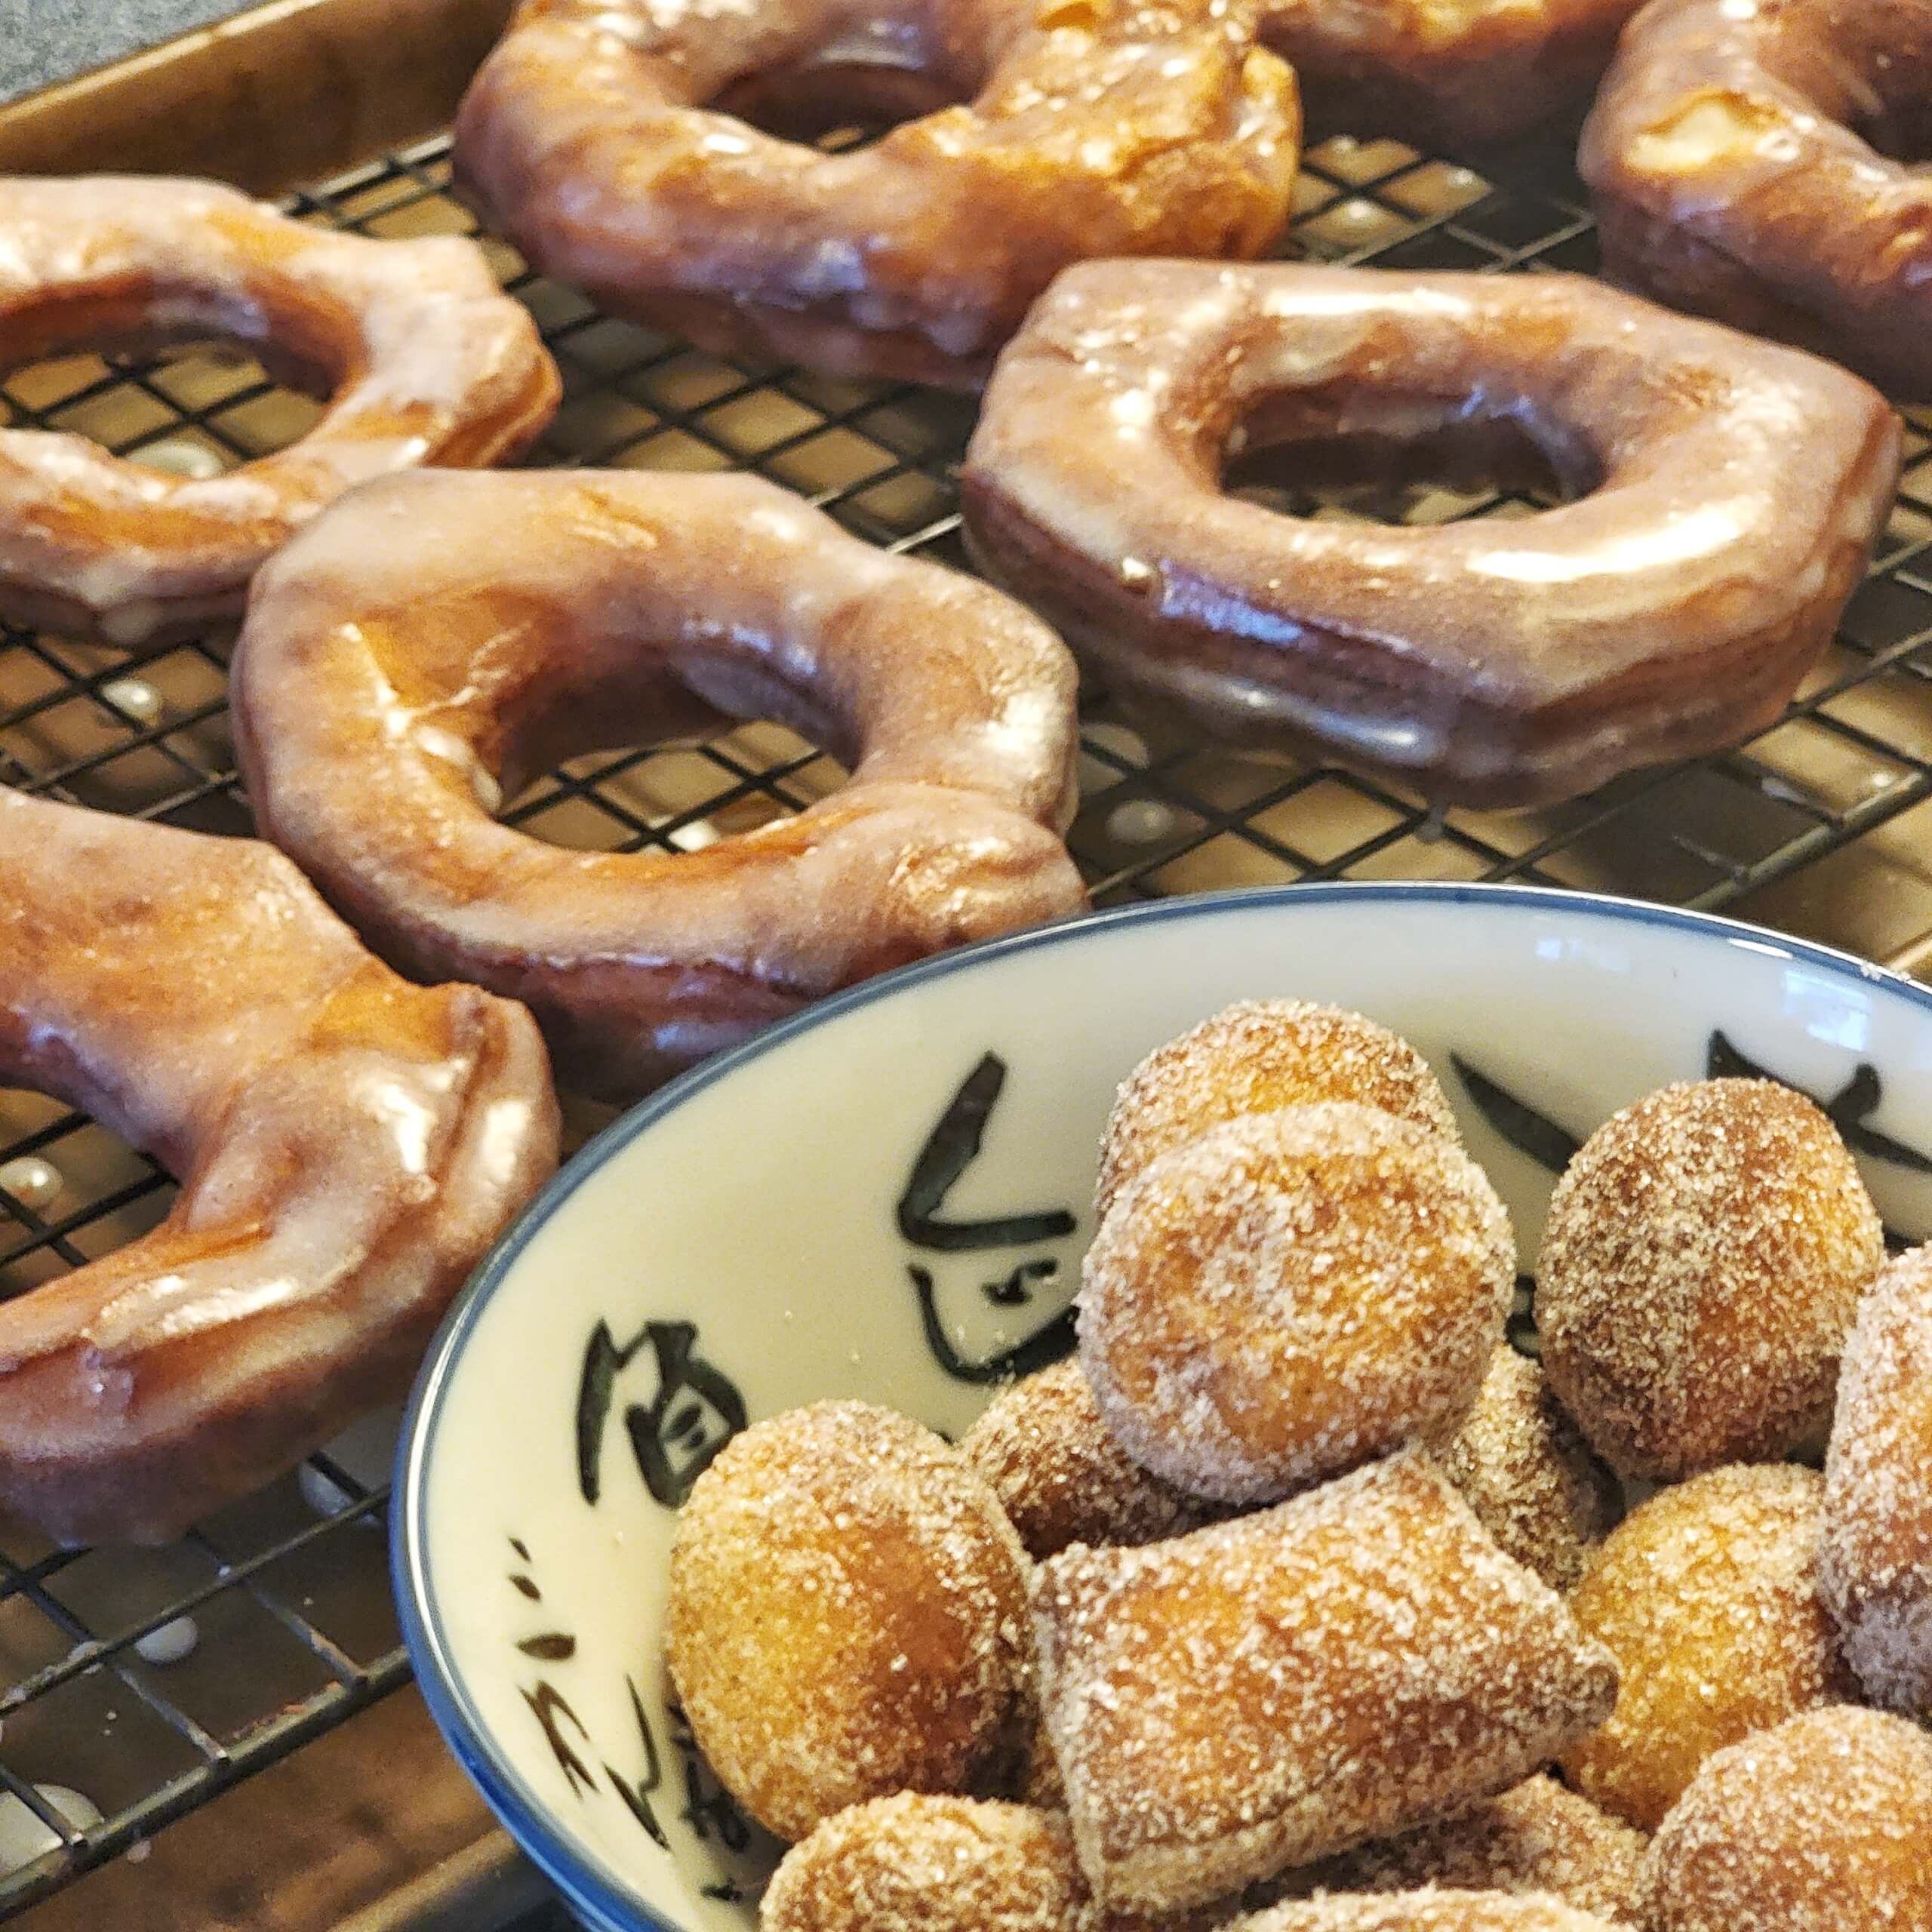 Freshly-glazed donuts resting on a wire rack. A bowl of sugar-coated donut holes is in the foreground.